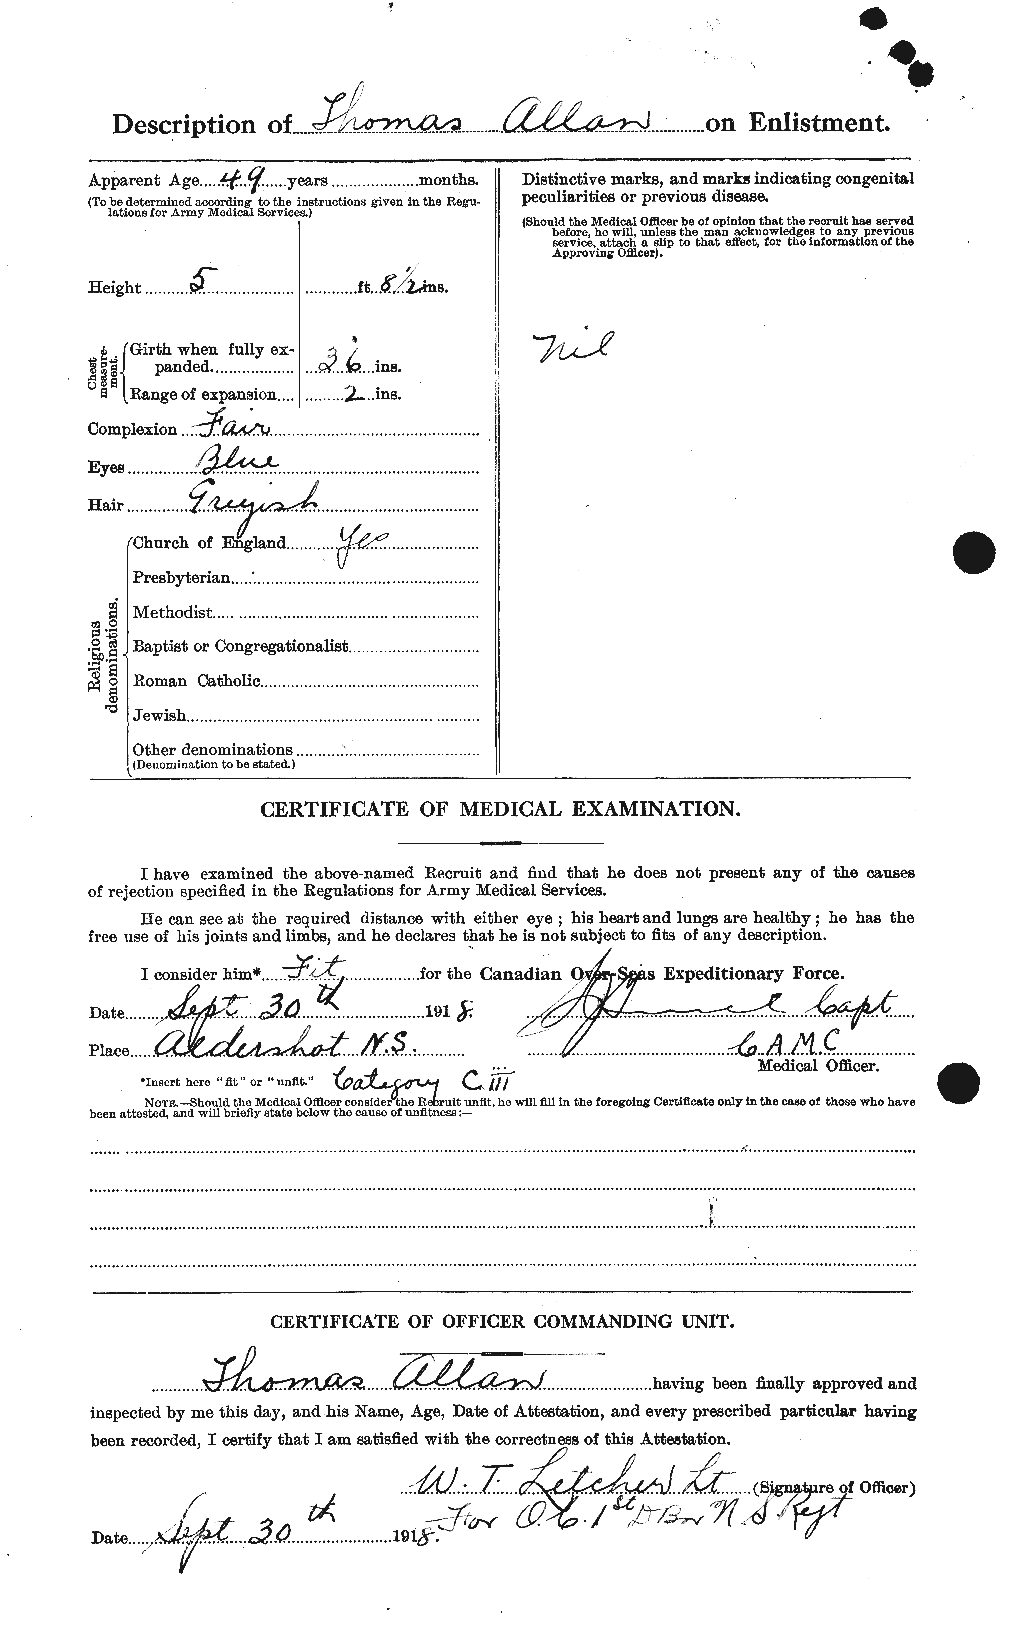 Personnel Records of the First World War - CEF 206985b